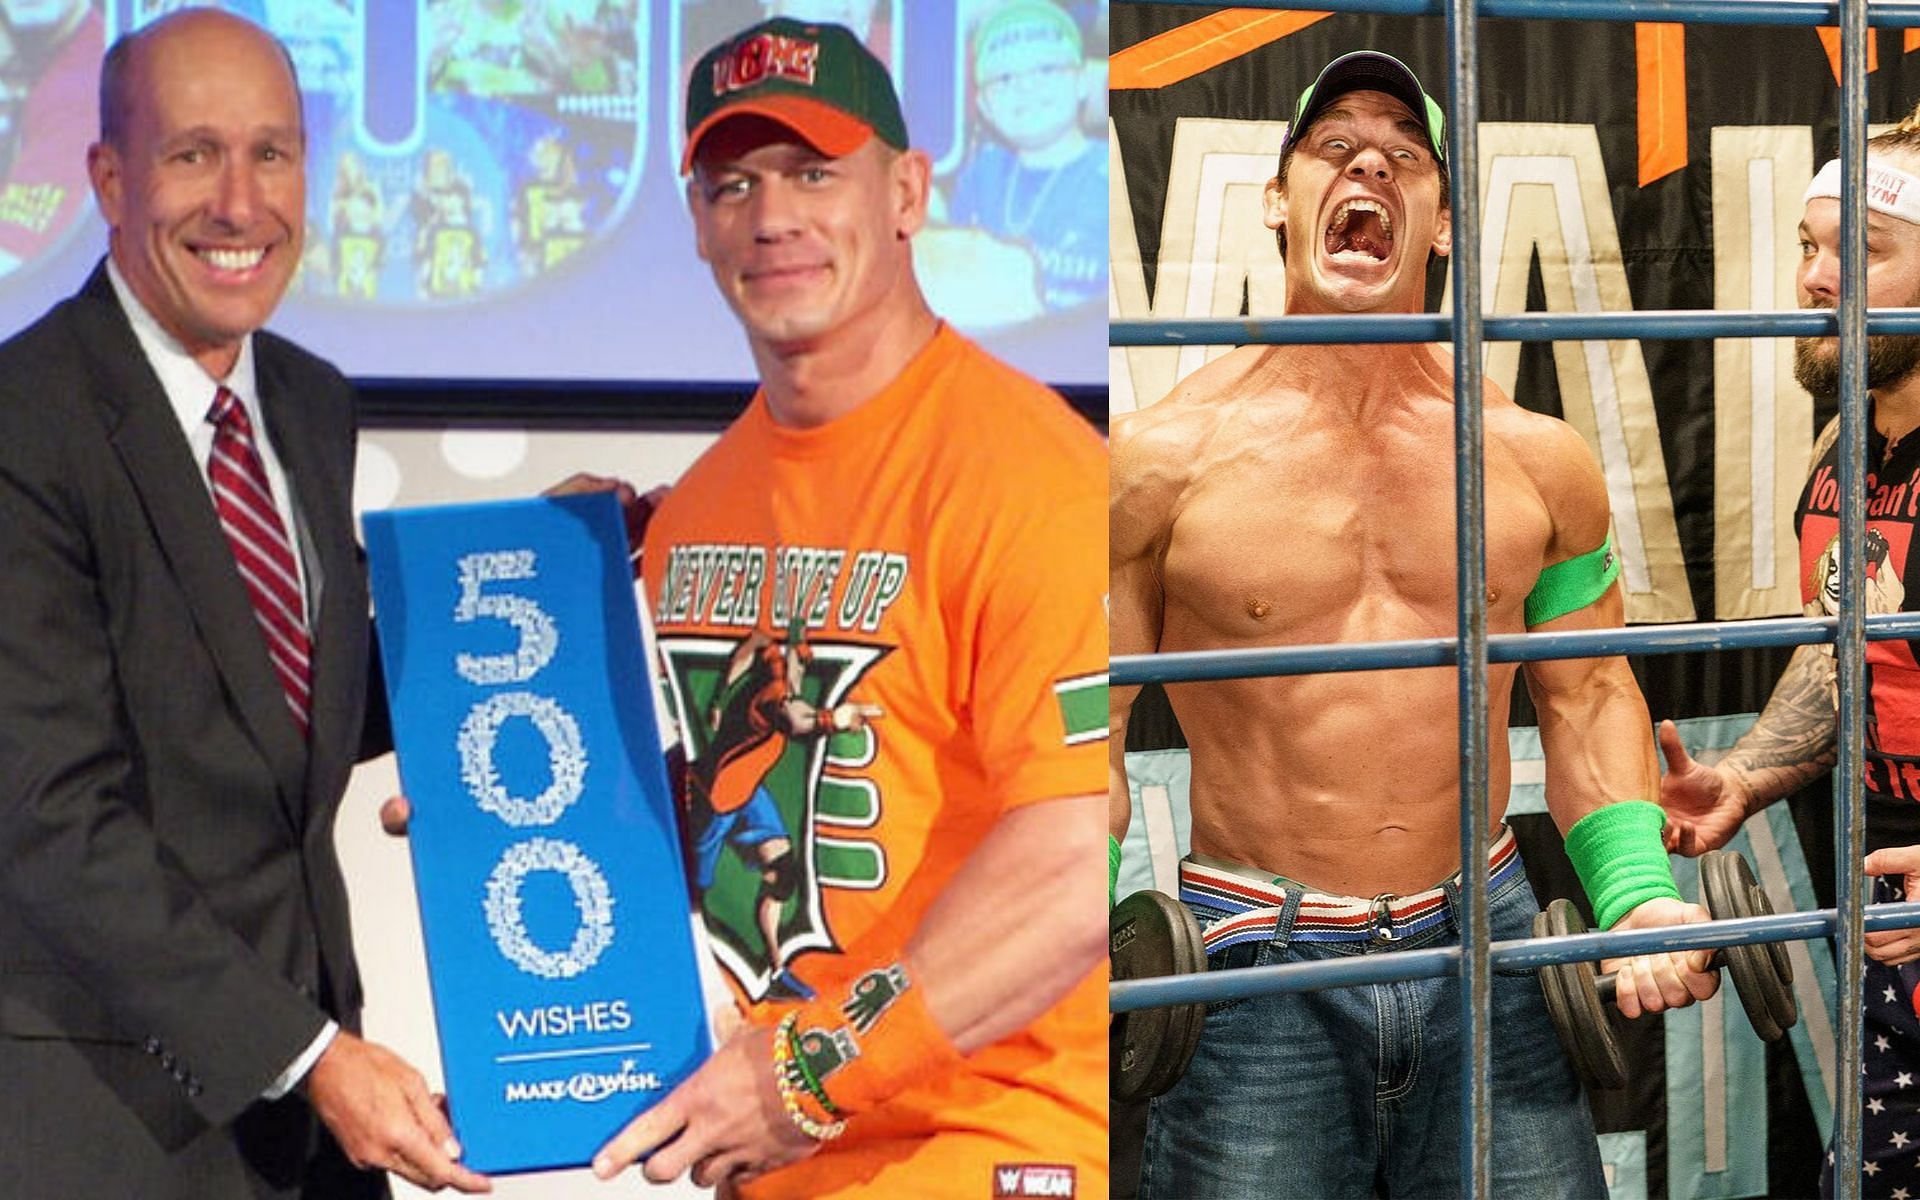 John Cena has earned his place among the greatest of professional wrestling.